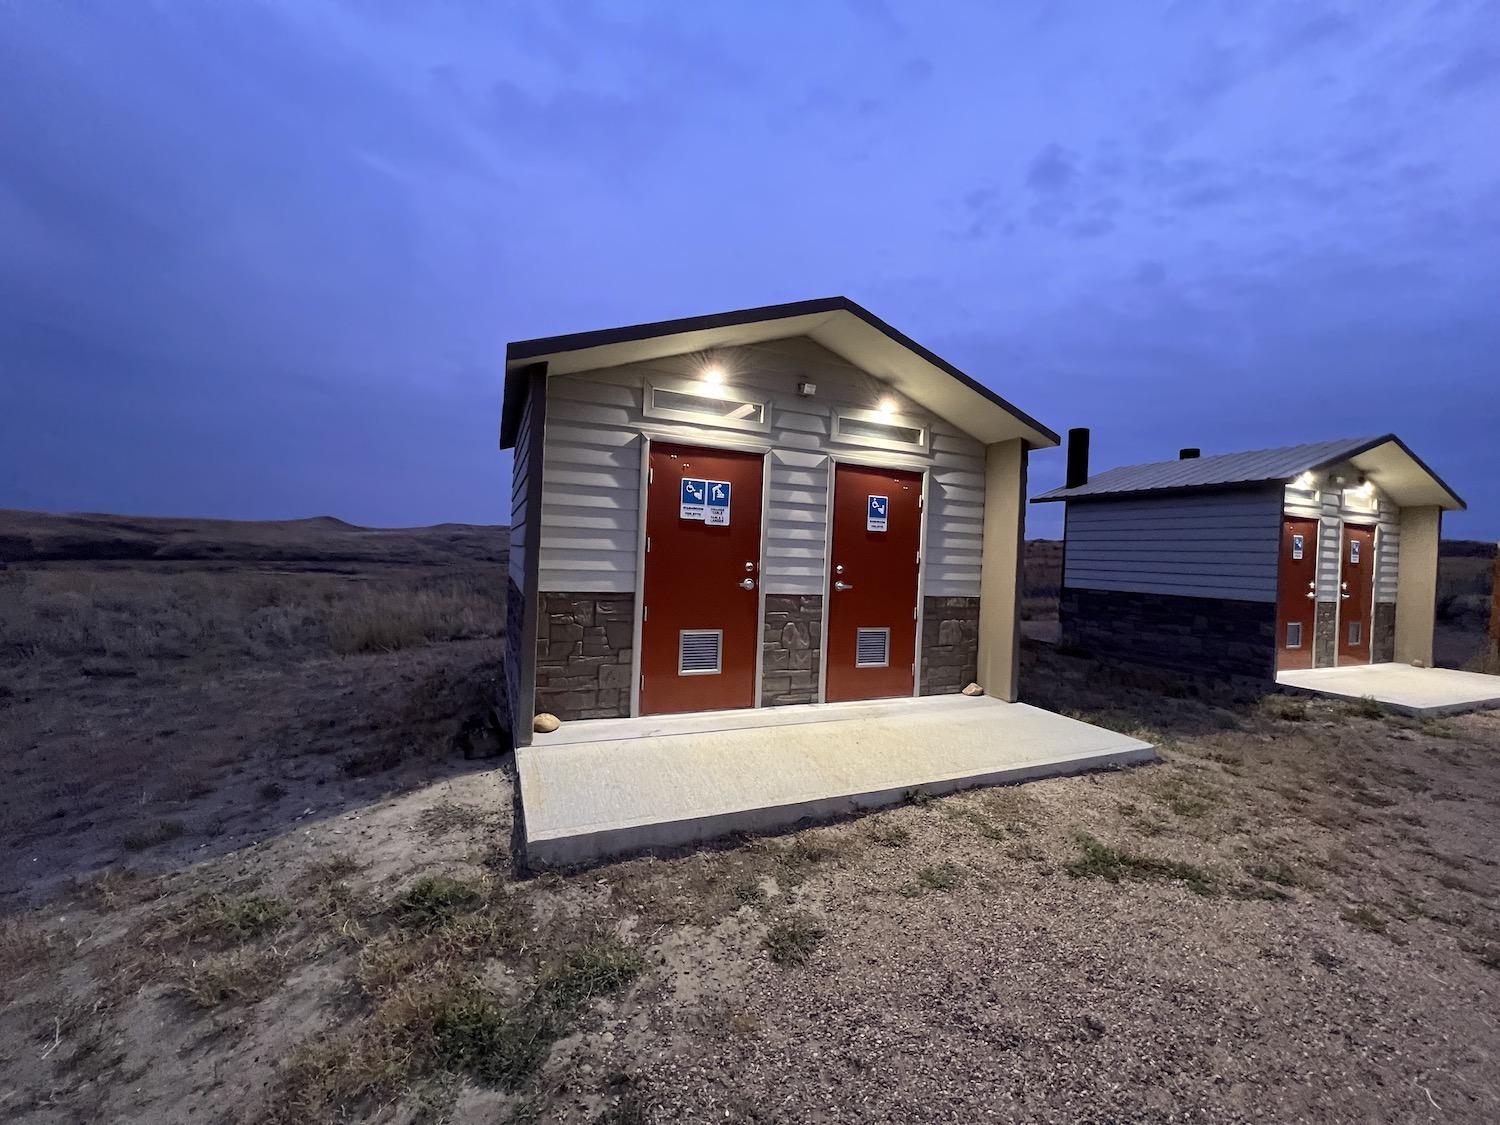 There are motion-sensor lights at these campground toilets in the East Block of Grasslands National Park in Saskatchewan.